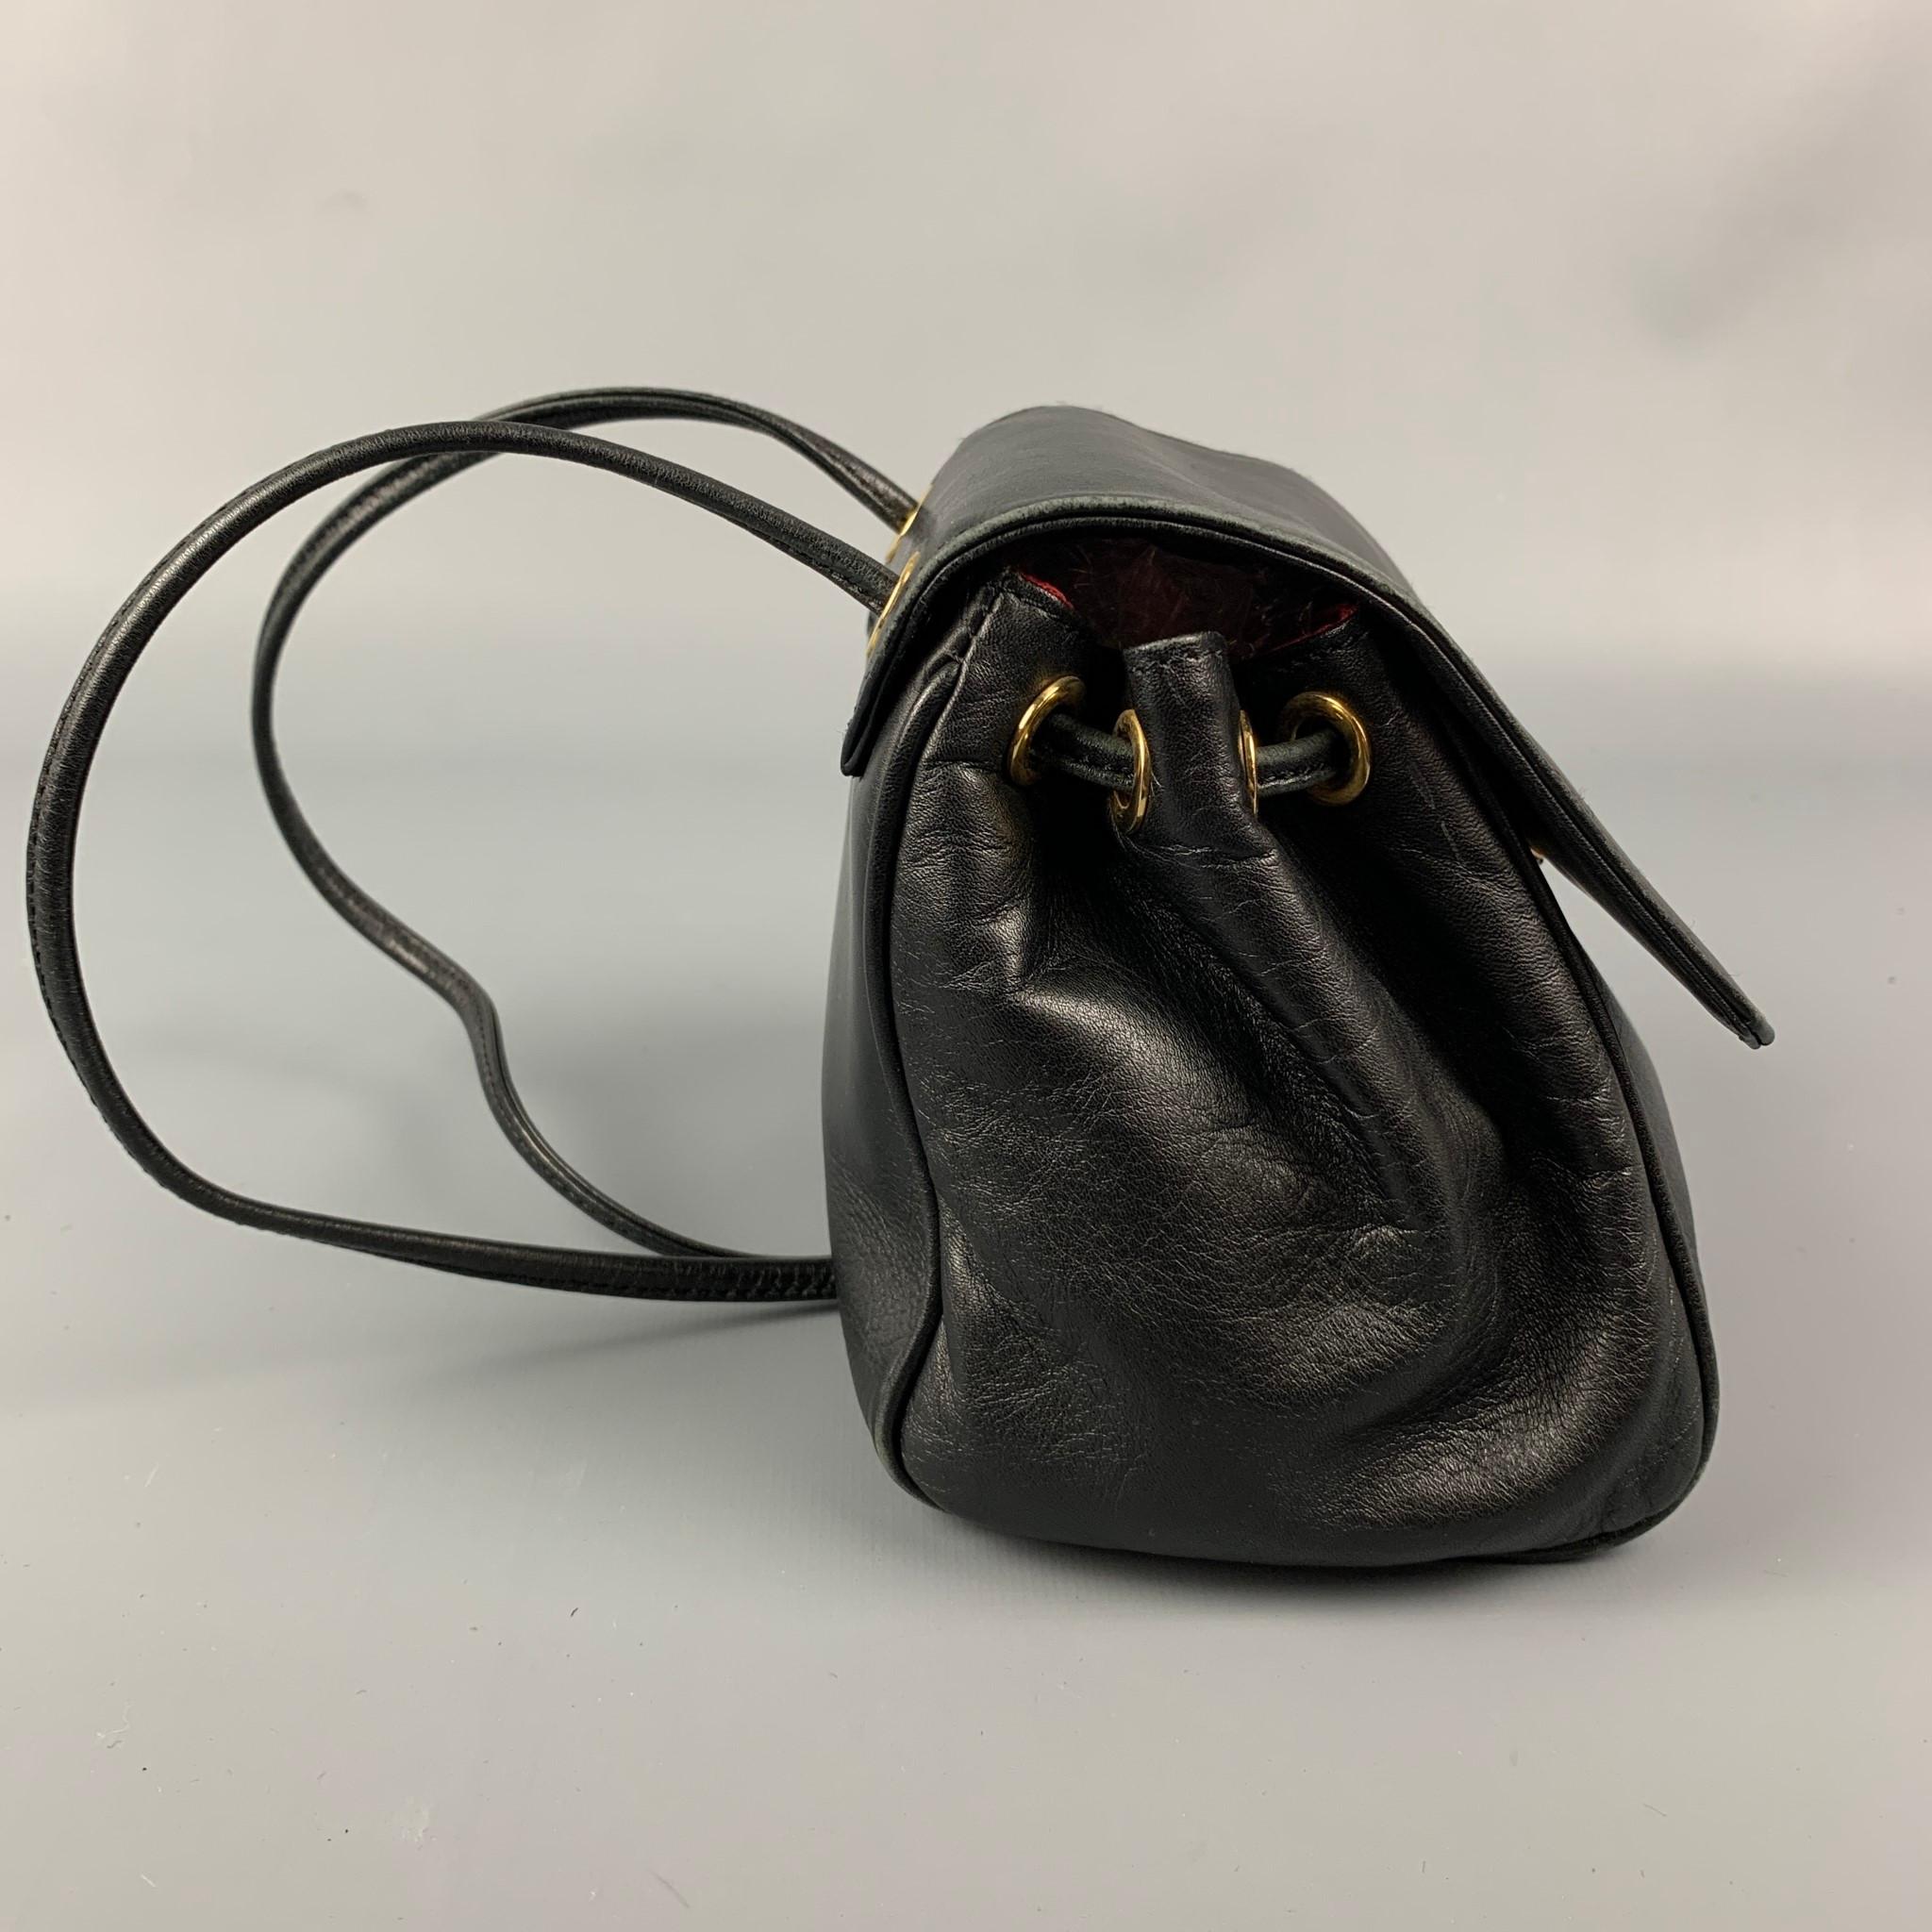 Vintage CHRISTIAN DIOR handbag comes in a black leather featuring gold tone logo charm details, red monogram print interior, mini, adjustable straps, and a snap button closure. Made in Italy.

Very Good Pre-Owned Condition.

Measurements:

Length: